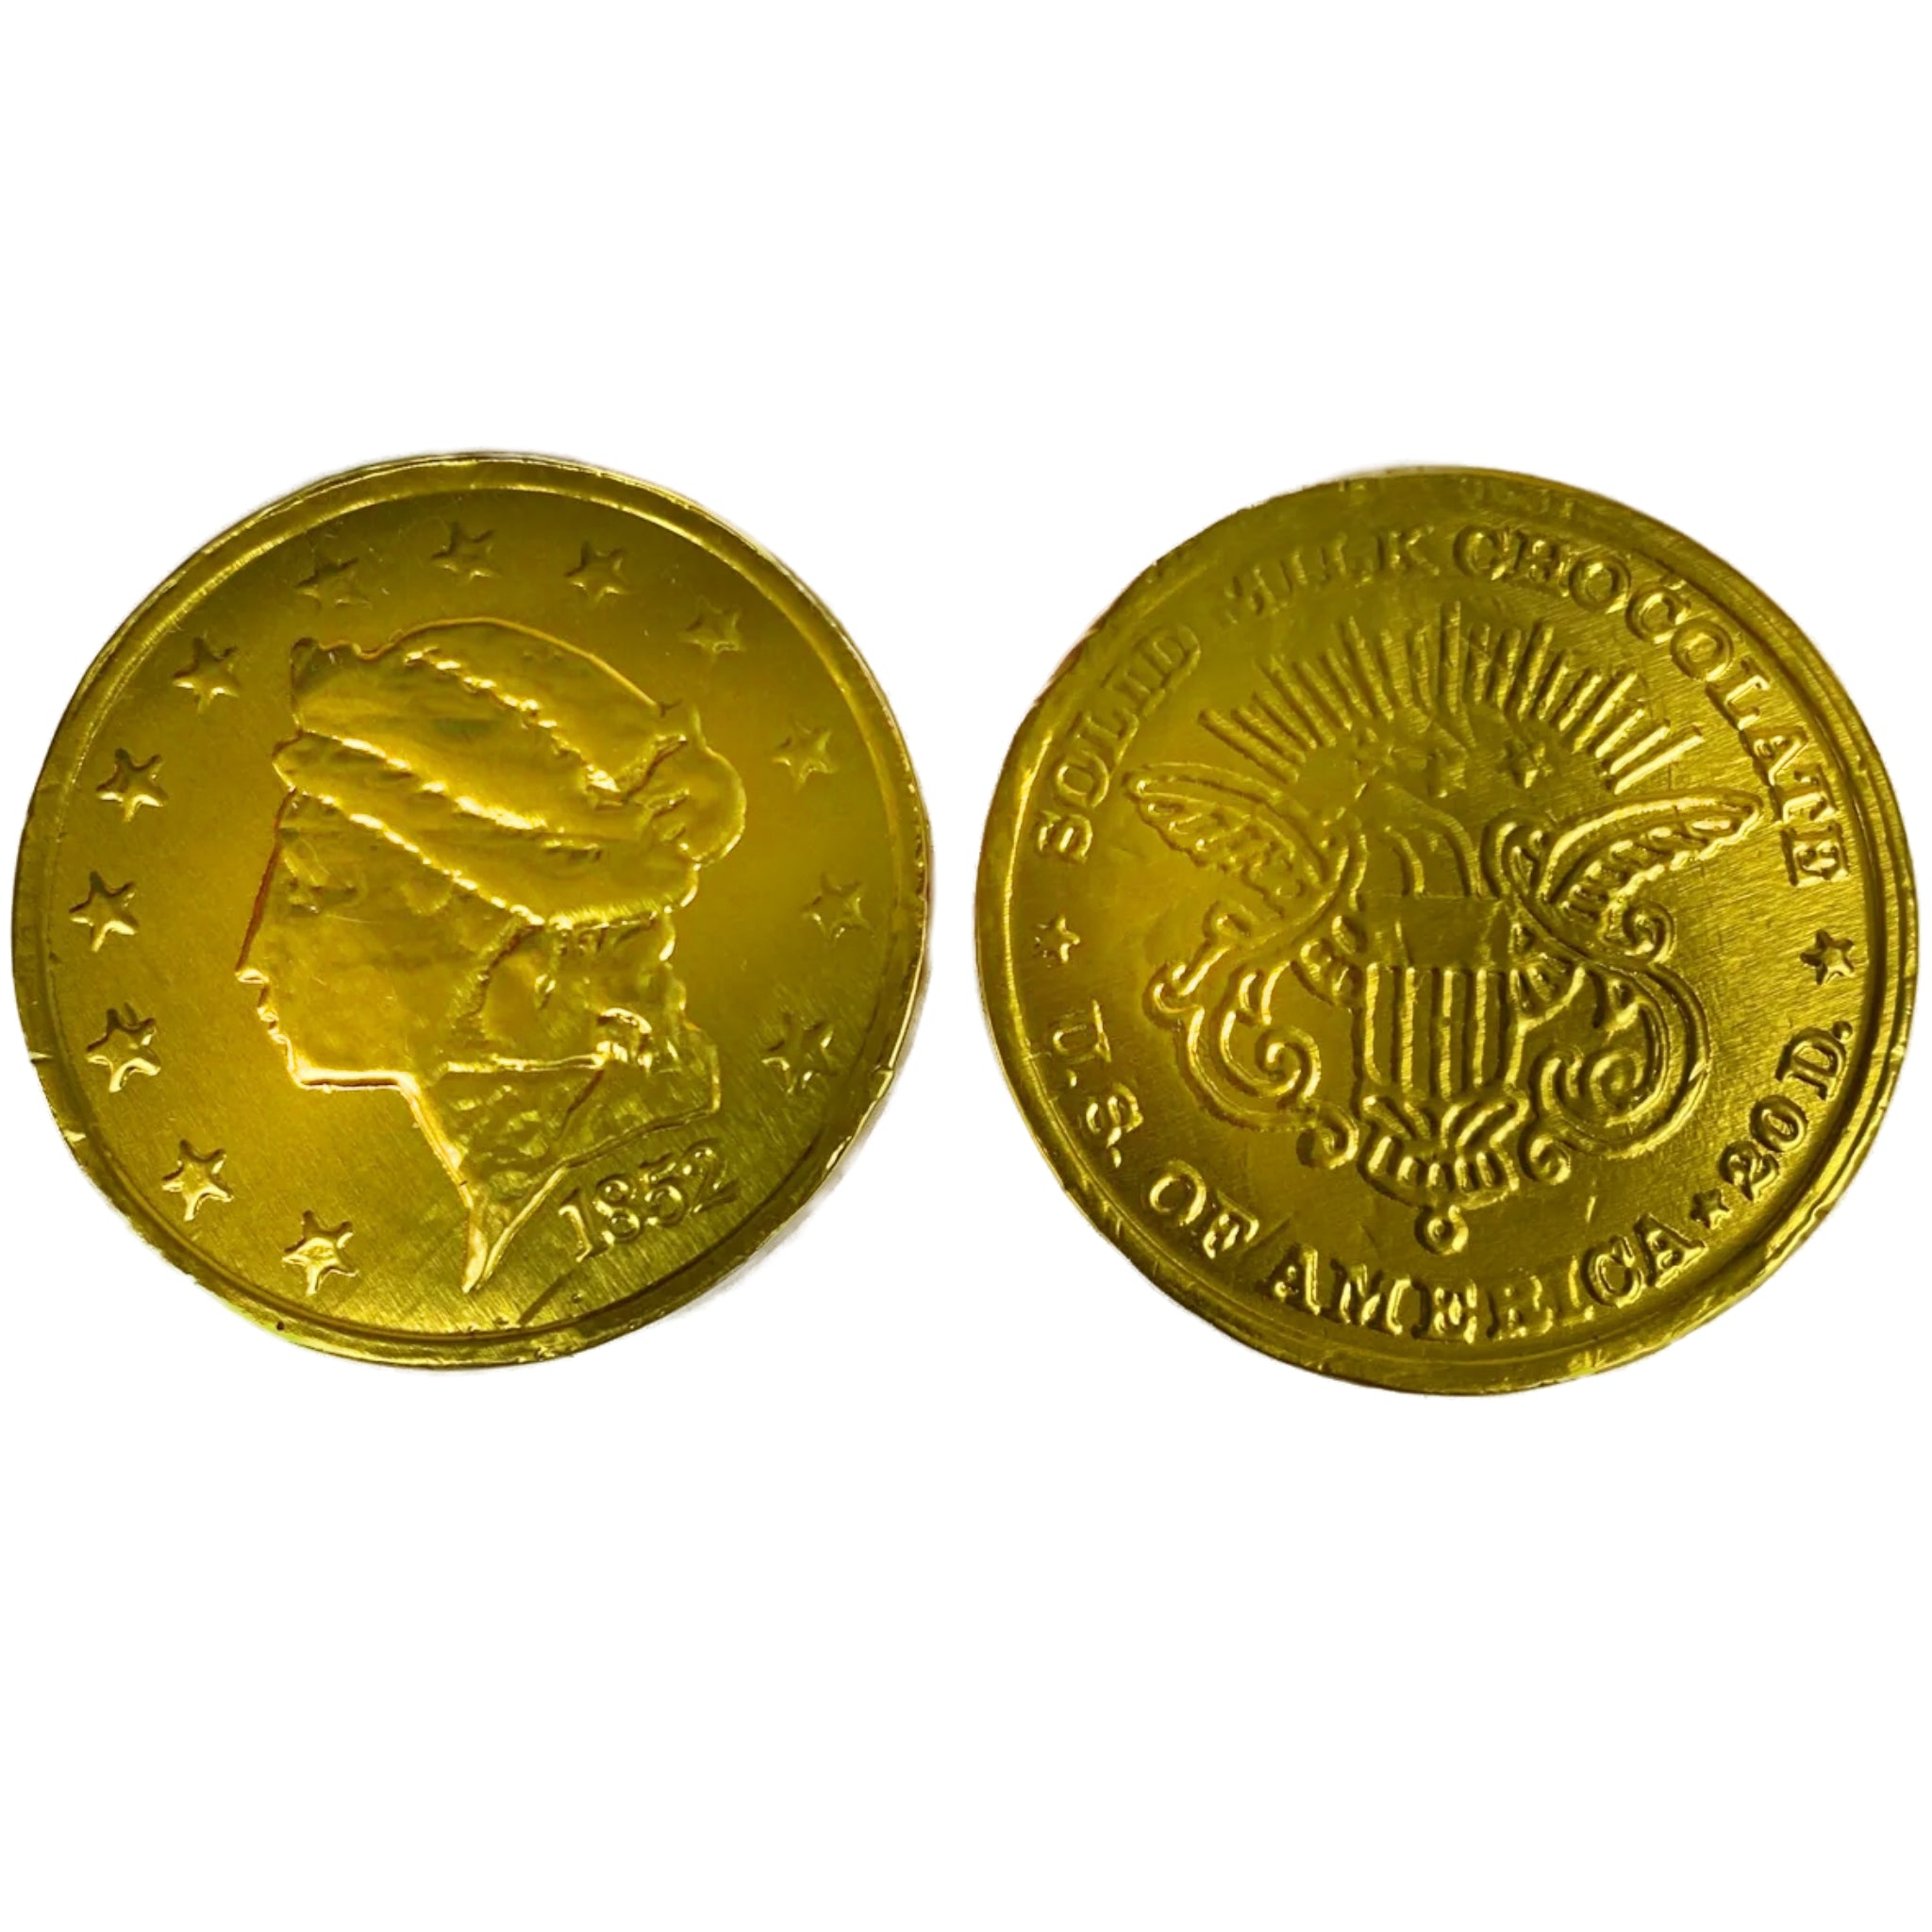 Chocolate Gold Coin.  Half dollar size, heavy weight, golden foil coin with solid milk chocolate inside. 